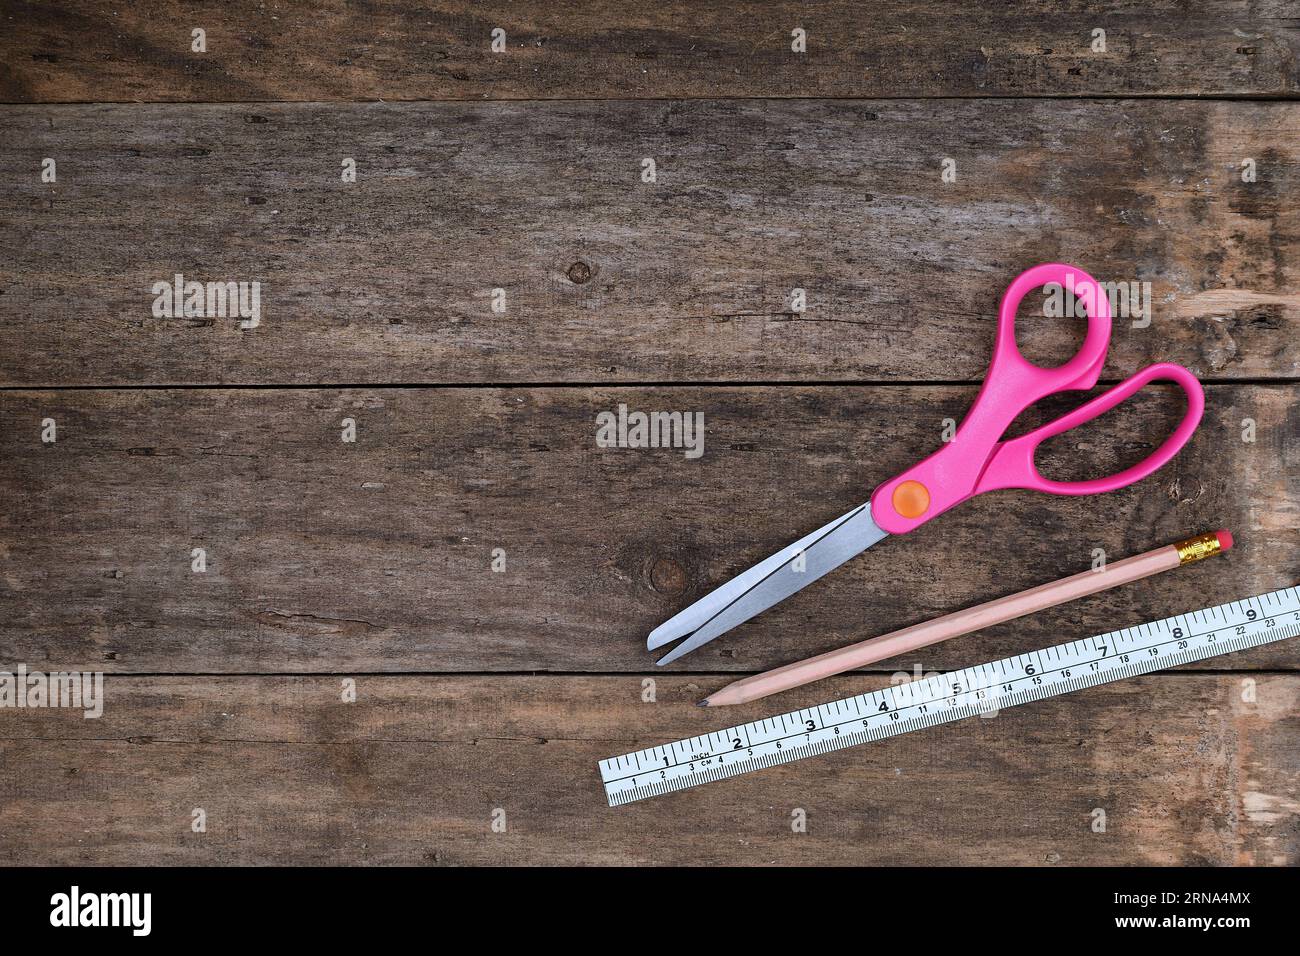 A flat, top view of an Arts and Crafts background with a pair of scissors, pencil and ruler in a rustic wooden setting with copy space Stock Photo